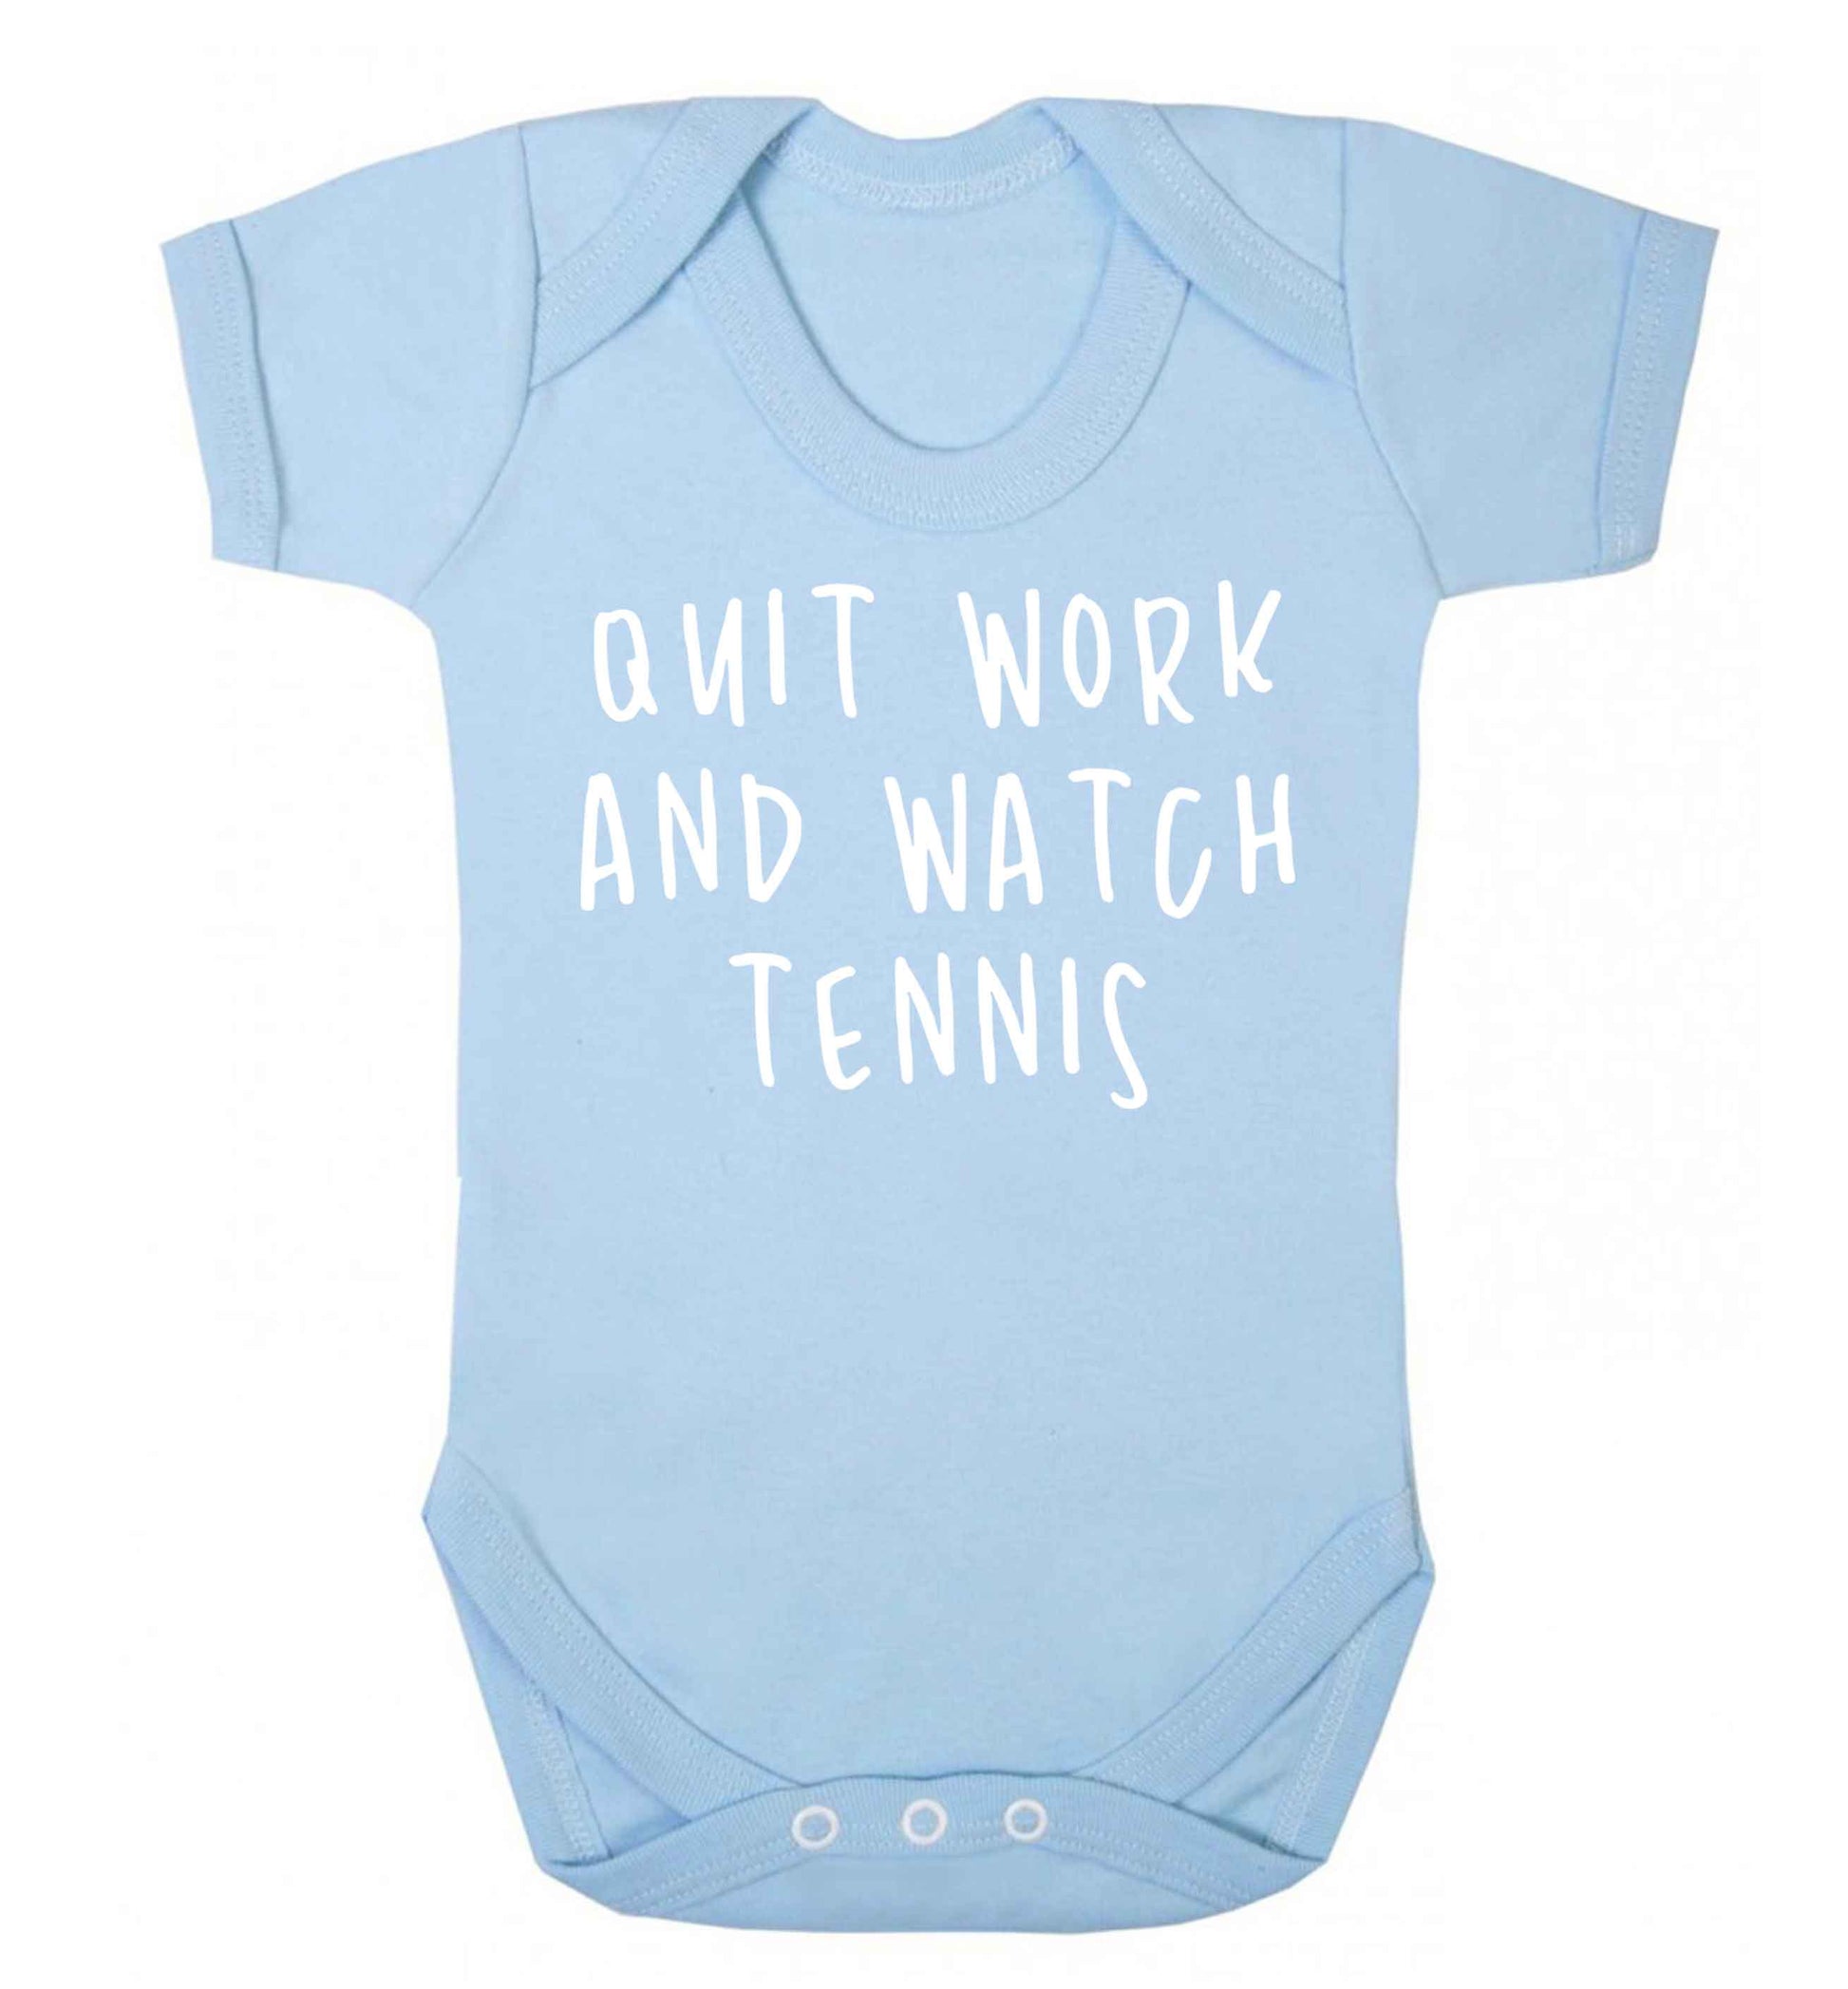 Quit work and watch tennis Baby Vest pale blue 18-24 months